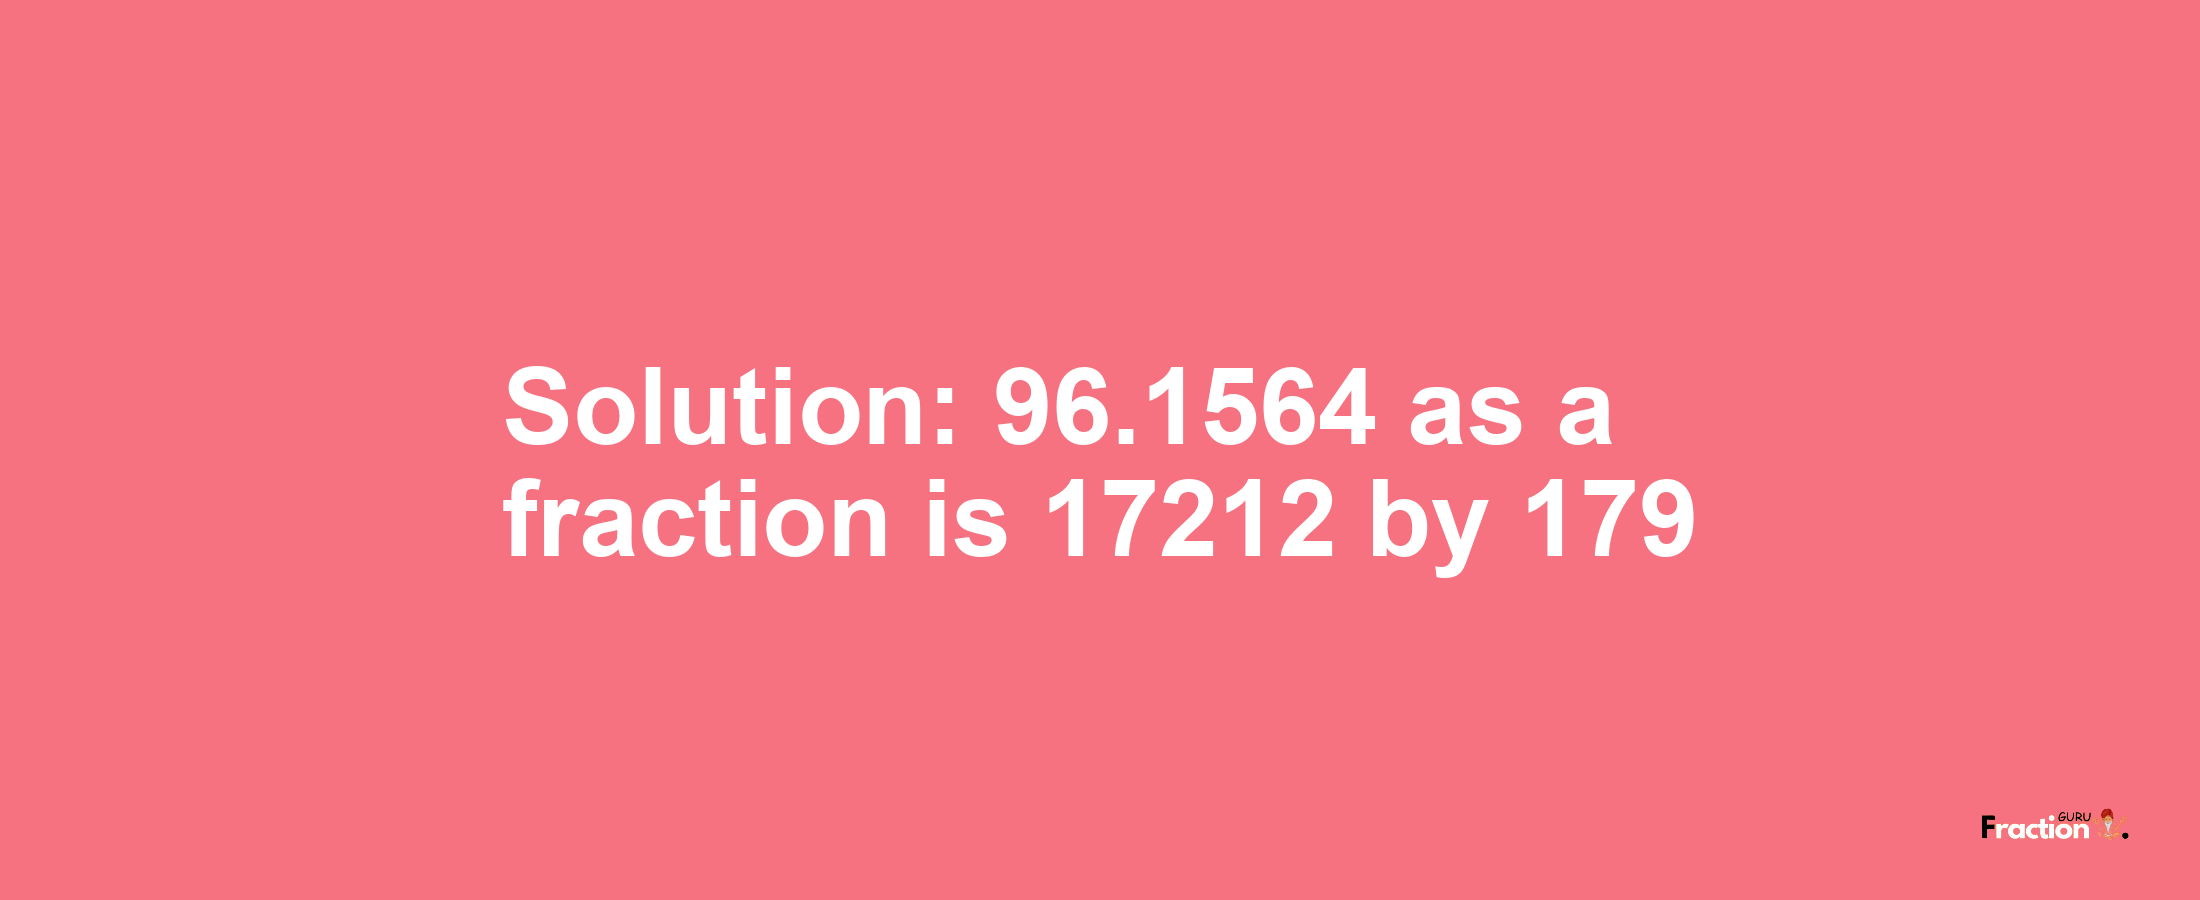 Solution:96.1564 as a fraction is 17212/179